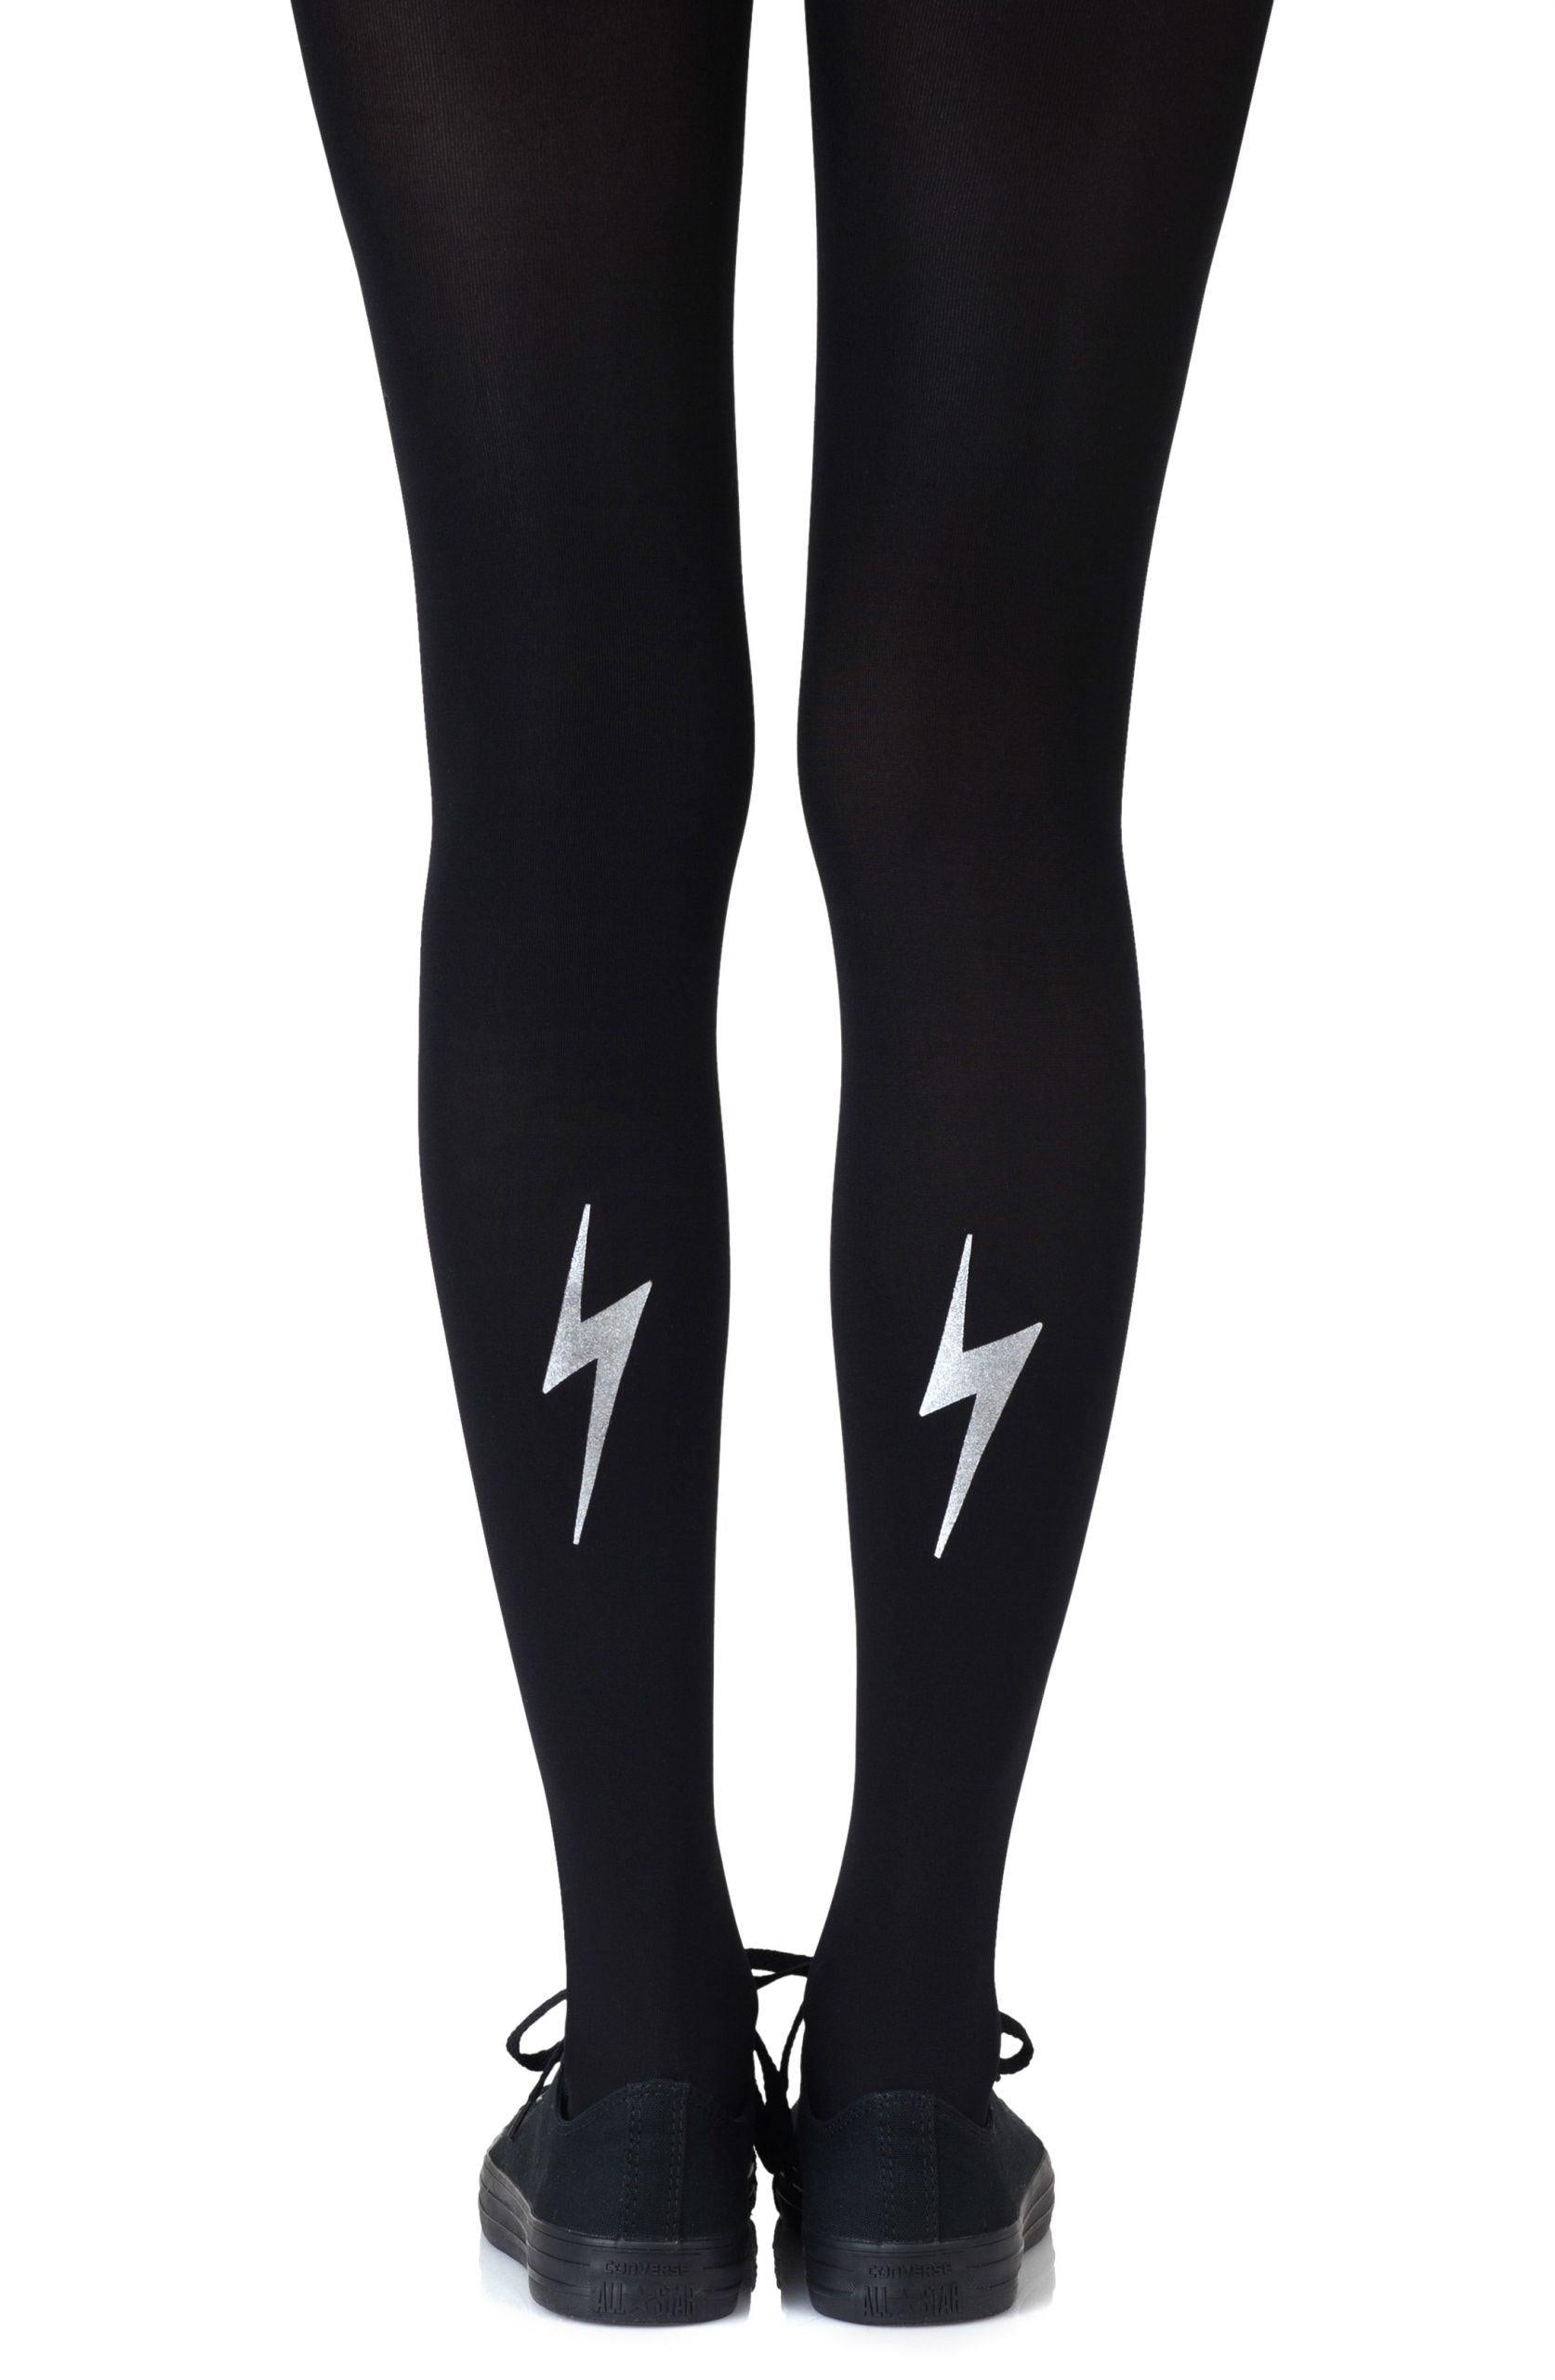 Zohara "Electric Feel" Silver Print Tights - Sydney Rose Lingerie 